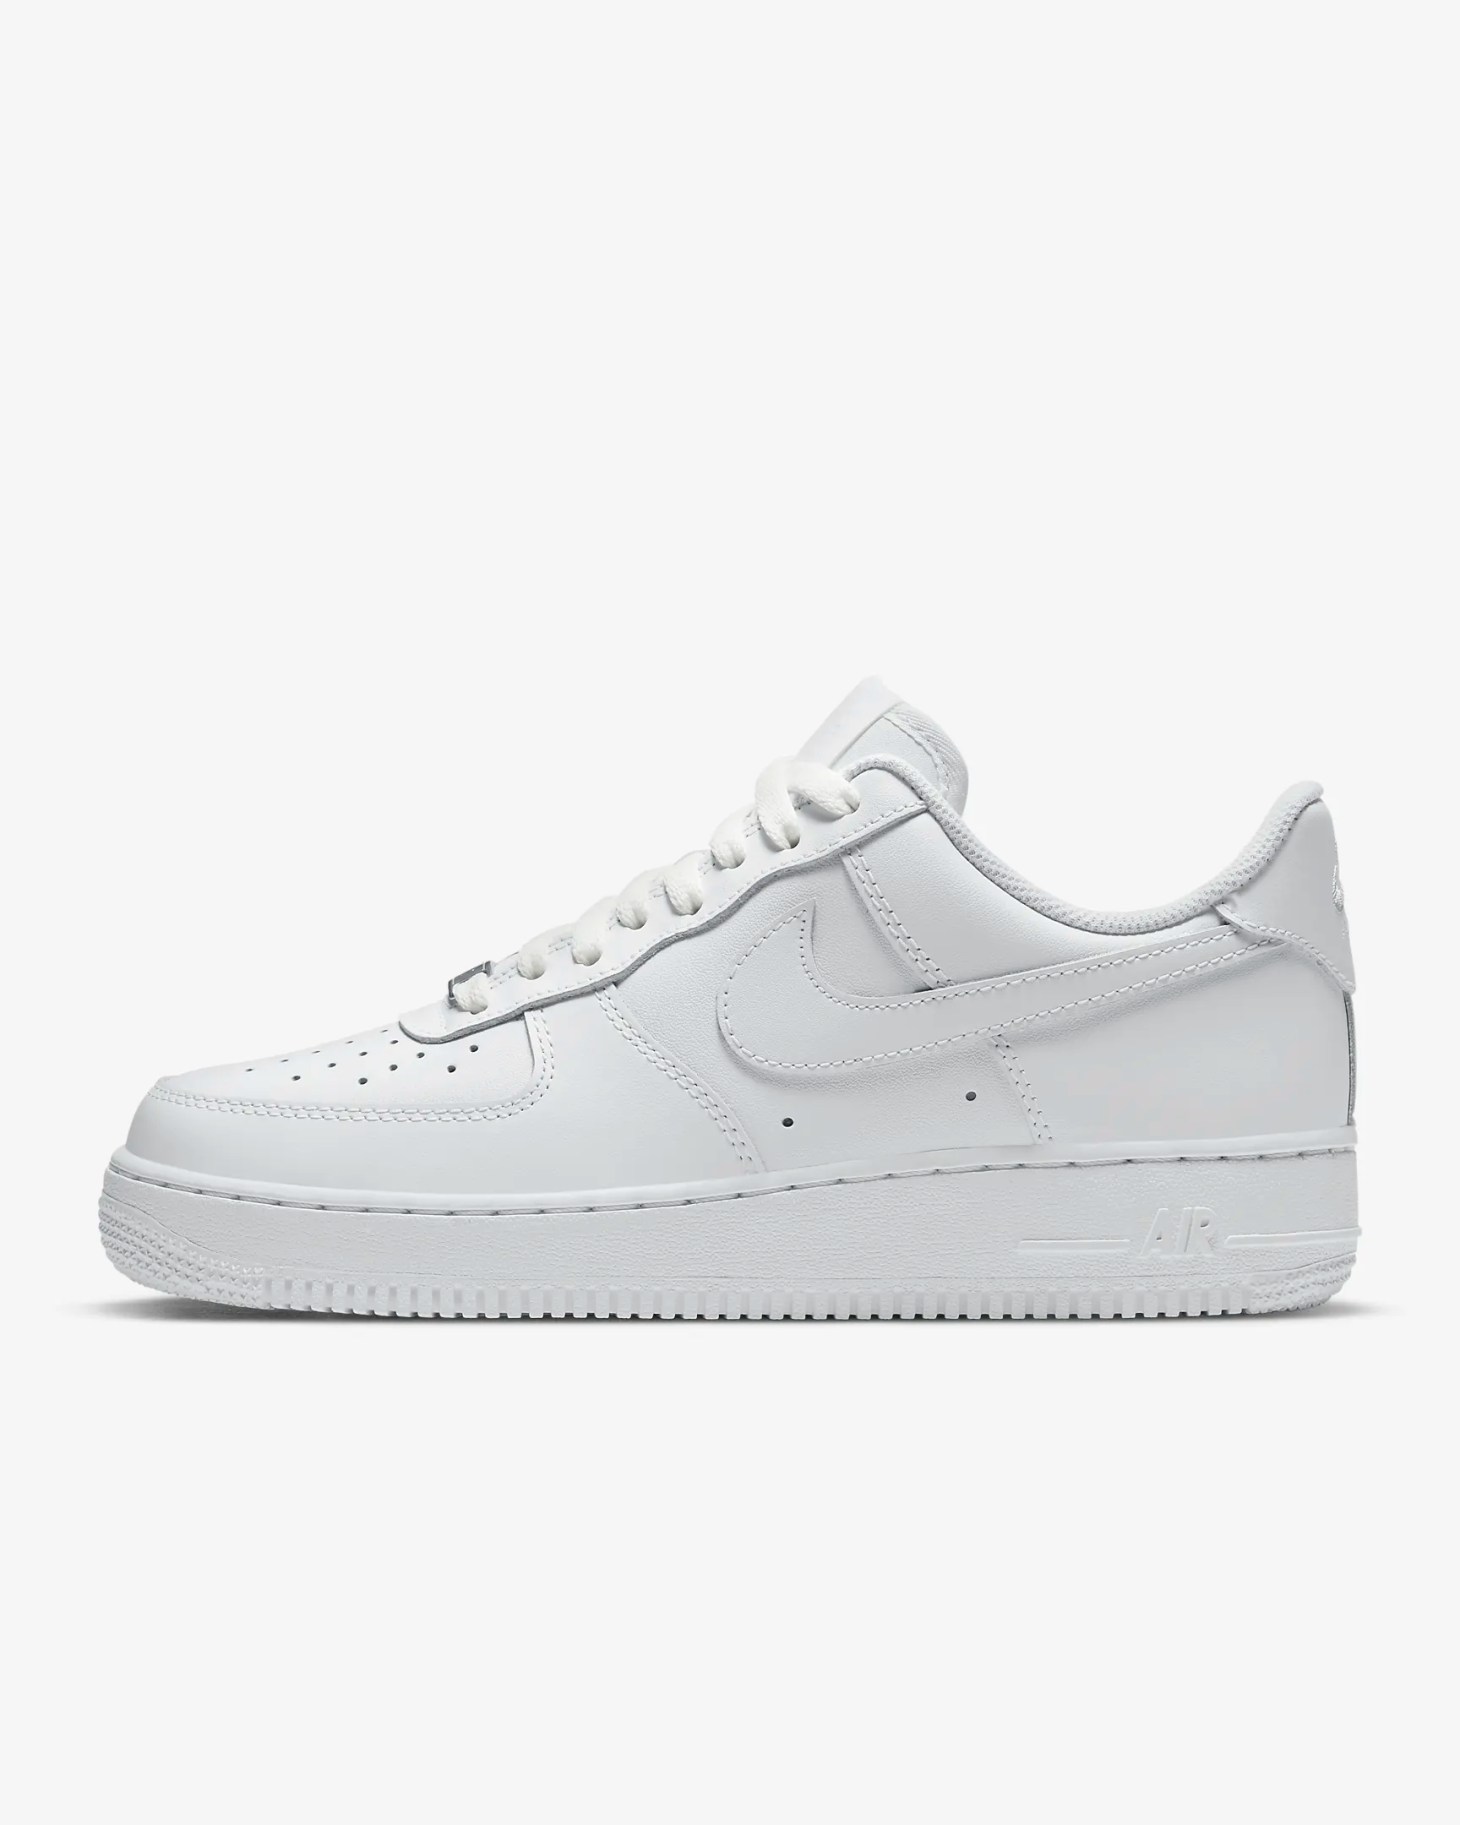 white nike air force 1 07, one of the best nike walking shoes